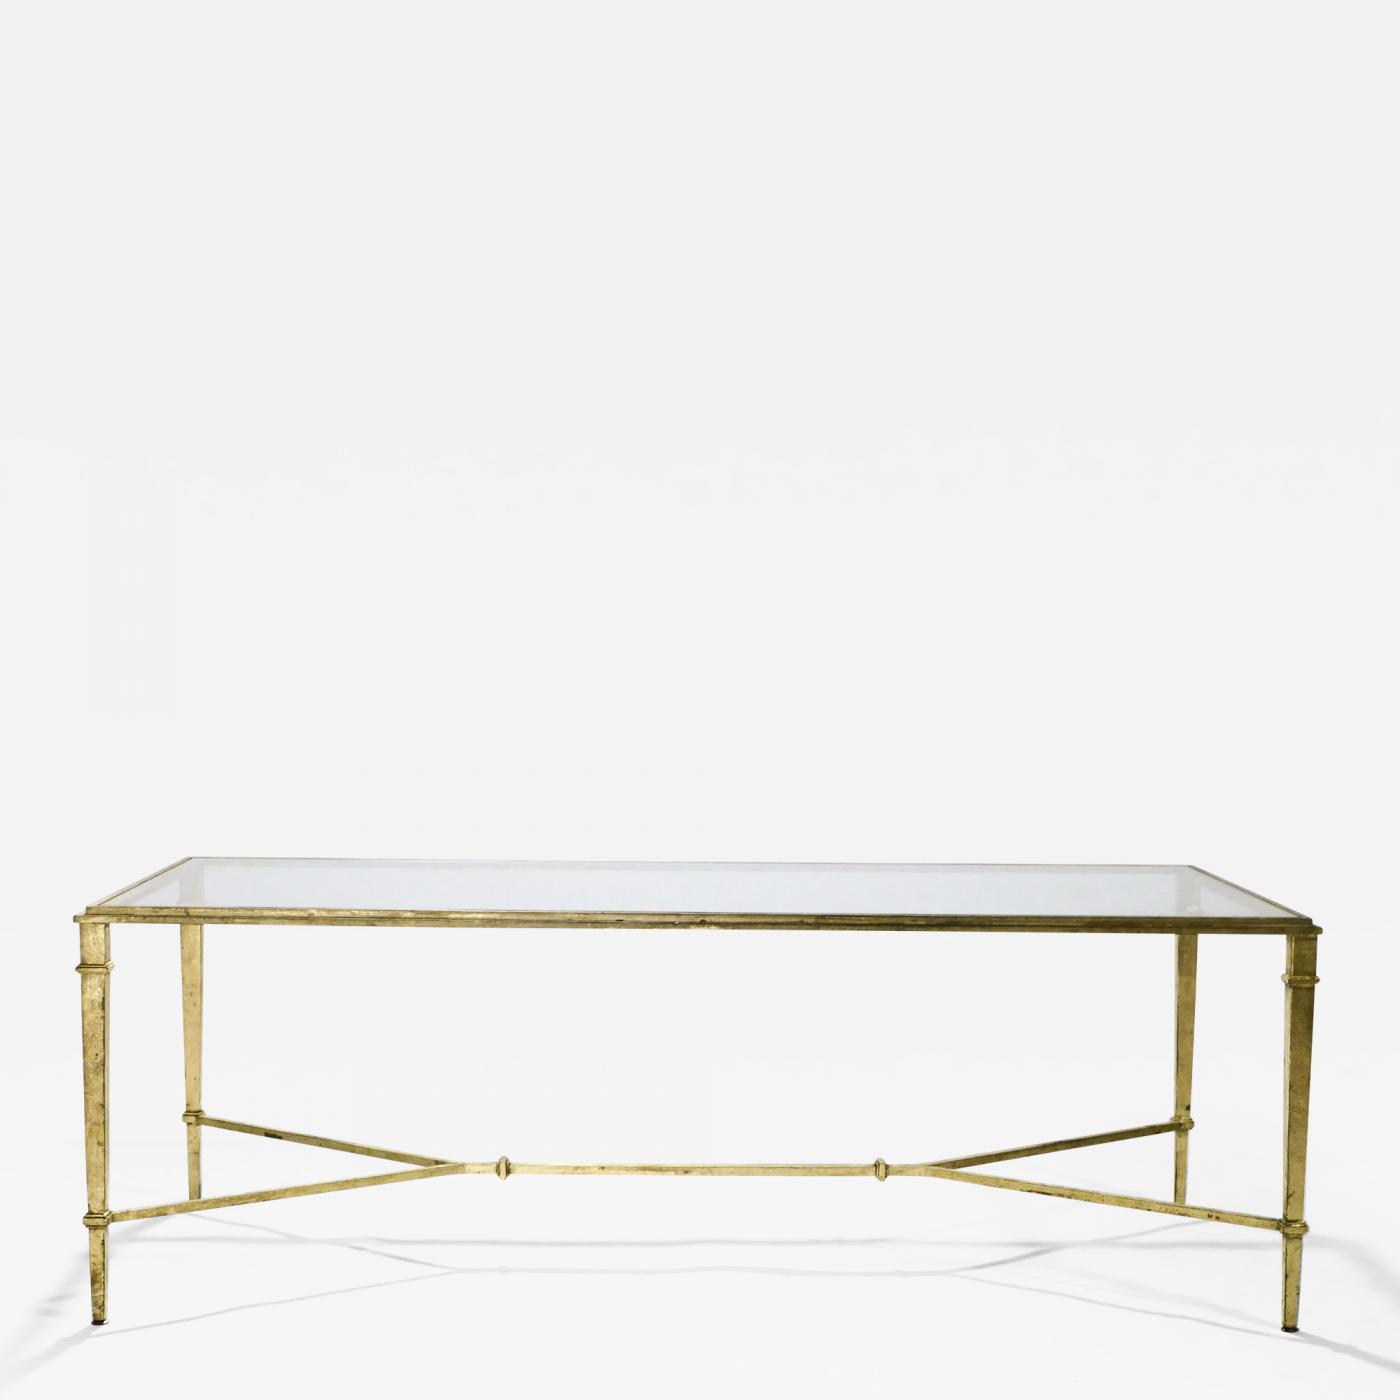 Roger Thibier Roger Thibier Gilt Wrought Iron Coffee Table 1960s